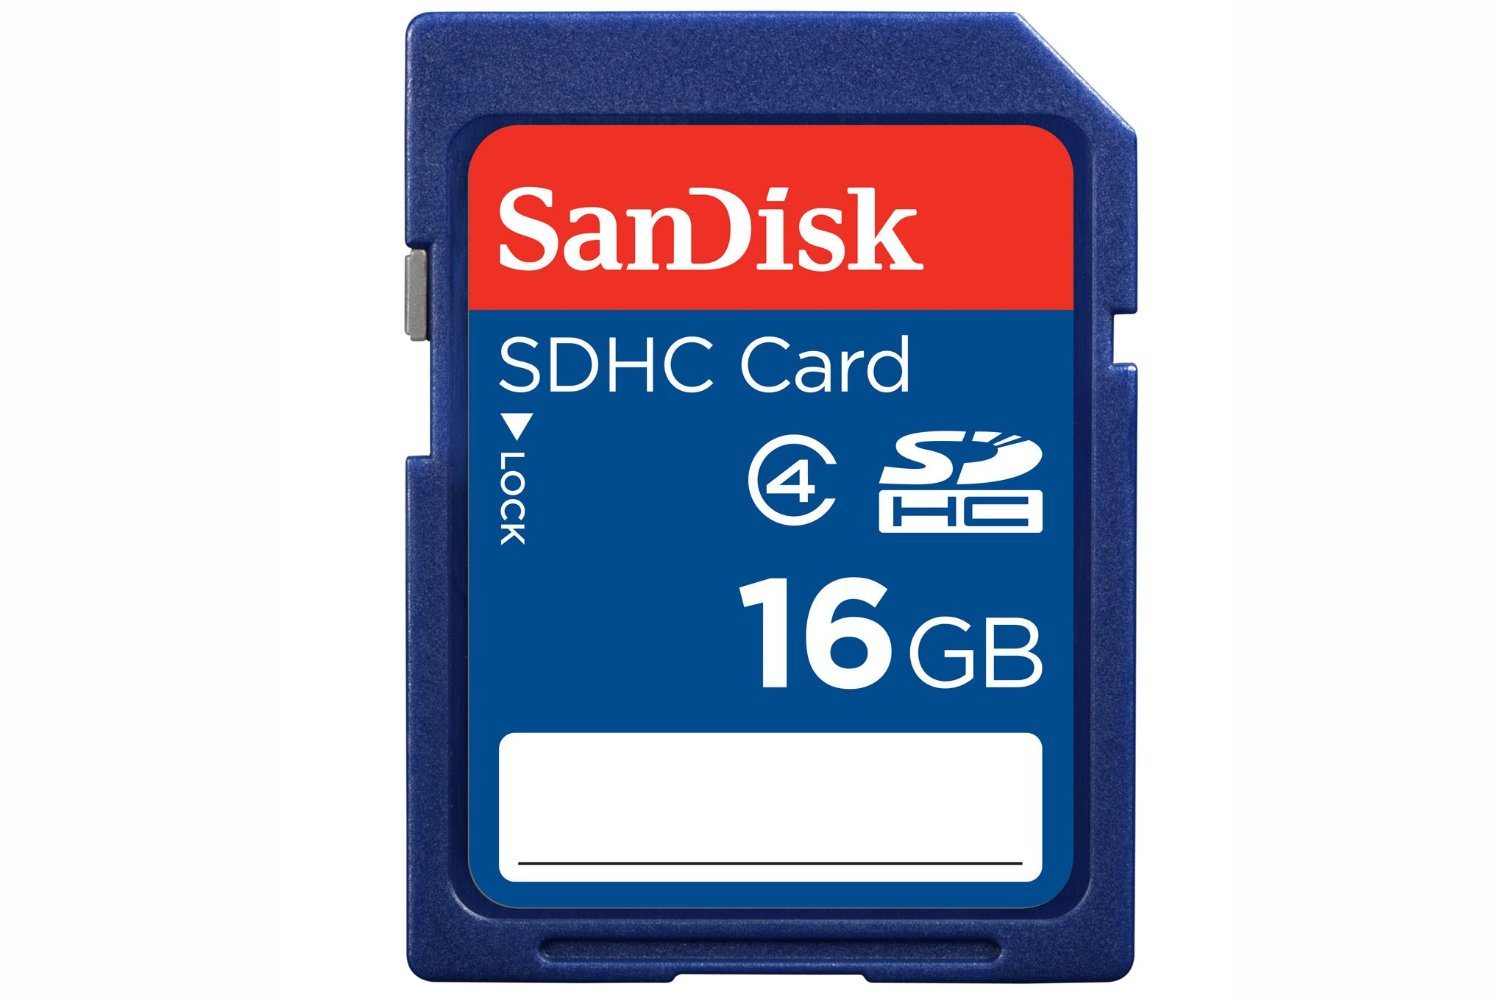 SD Card FAQs: Everything You Need to Know to Save Space and Store More Media